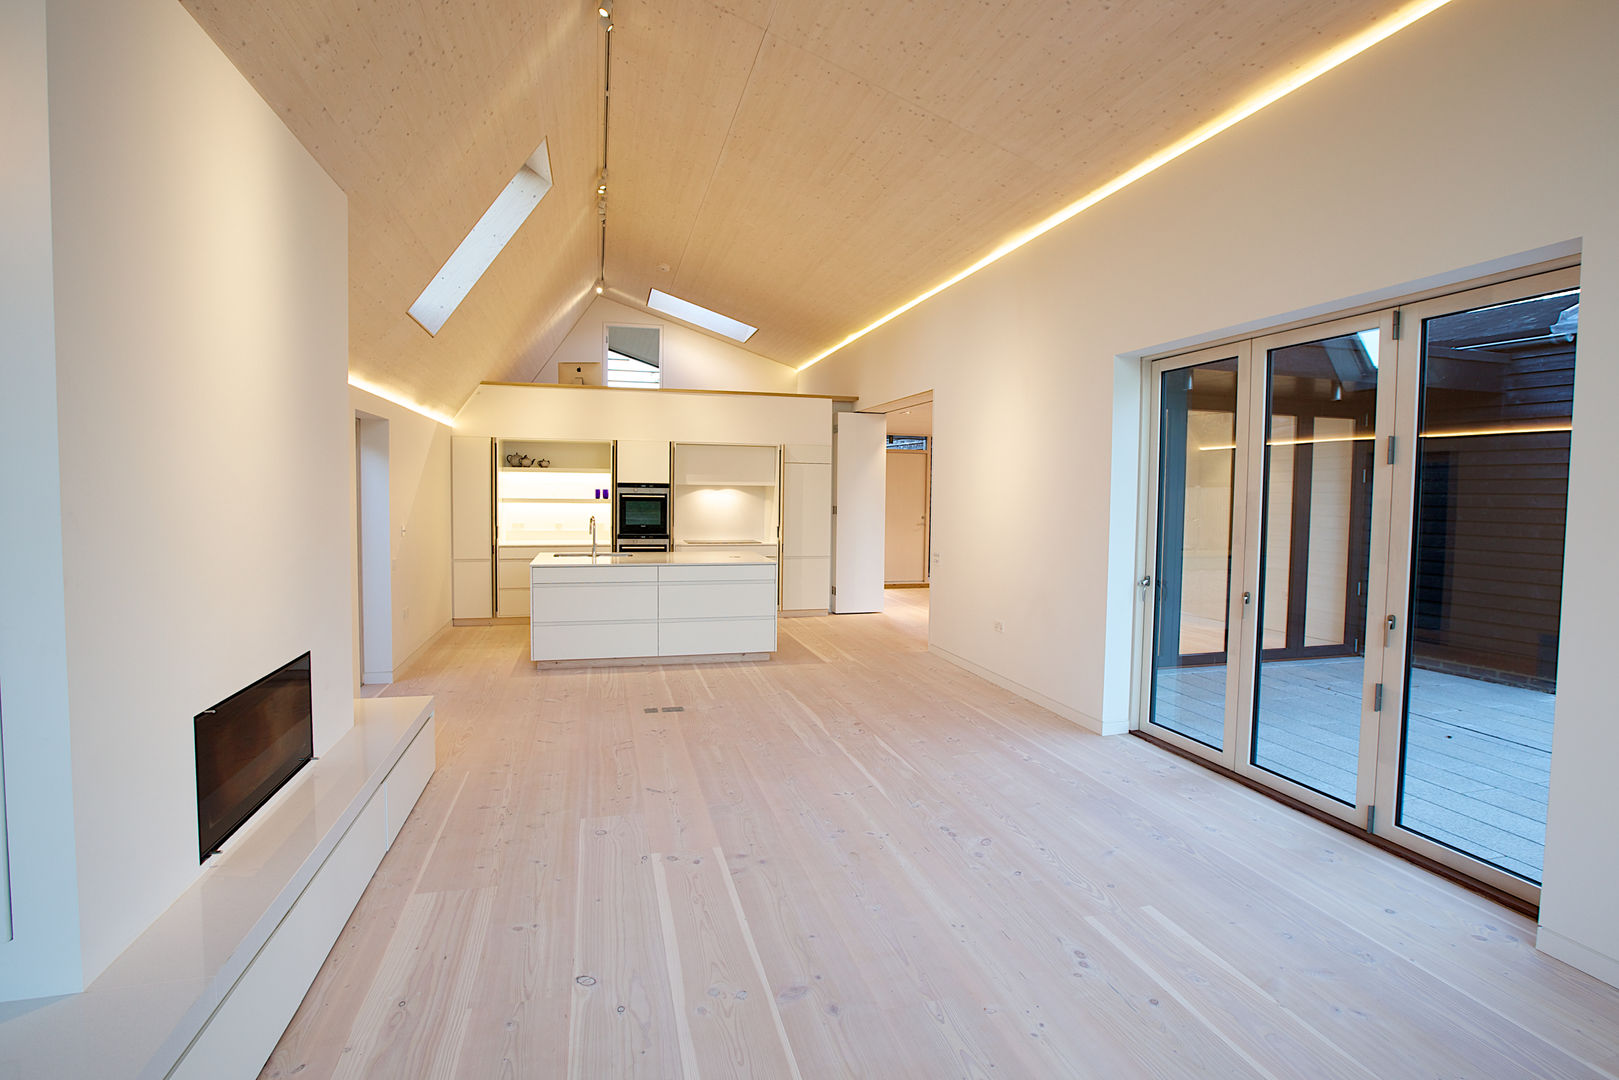 ​The open plan kitchen and living room at the Bourne Lane Eco House. Nash Baker Architects Ltd 모던스타일 거실